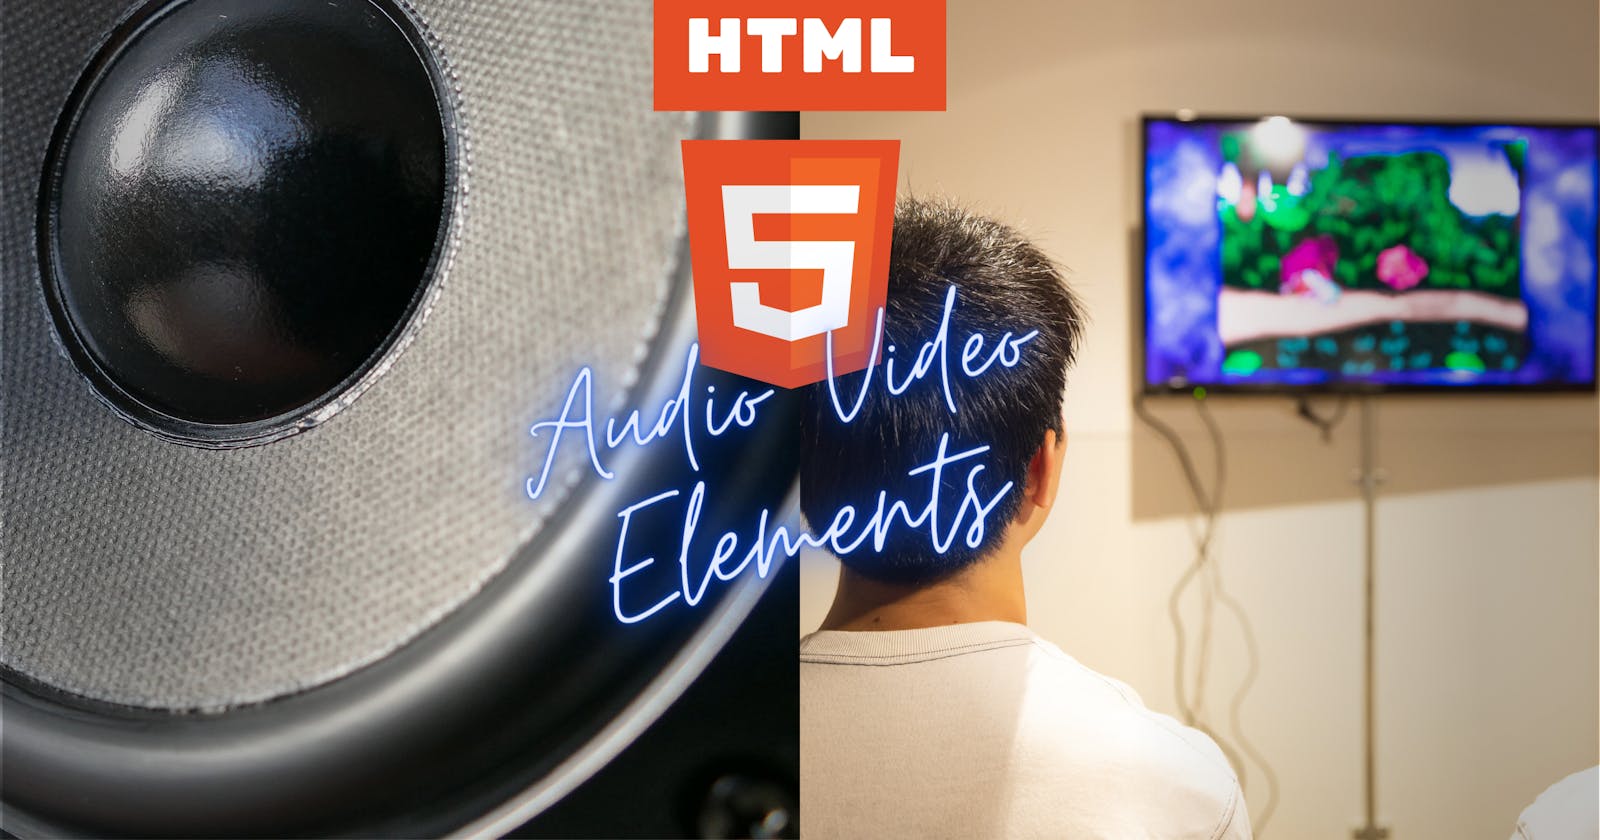 Audio and Video in HTML